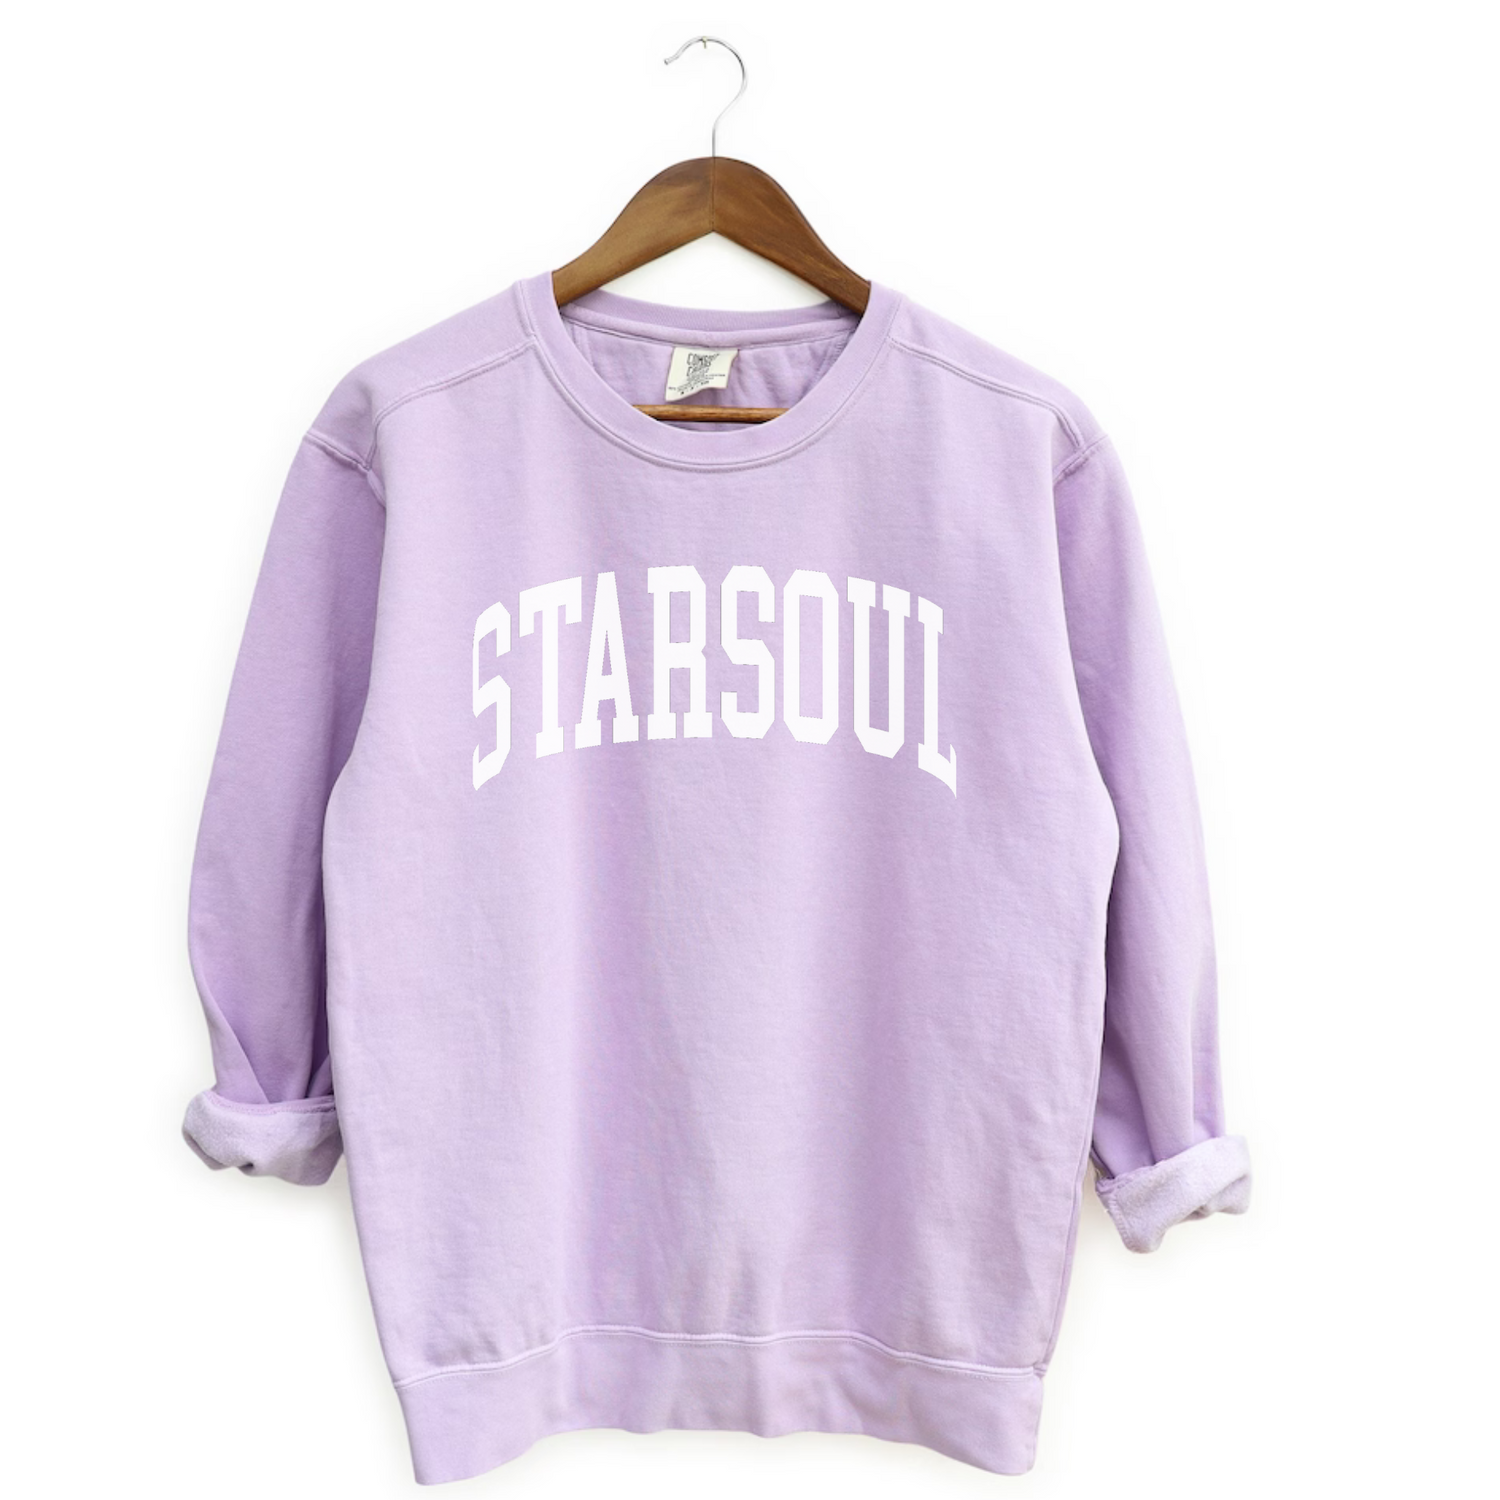 A buttery soft oversized cozy sweatshirt, all proceeds are donated to charity. (faded charcoal color with white starsoul logo)